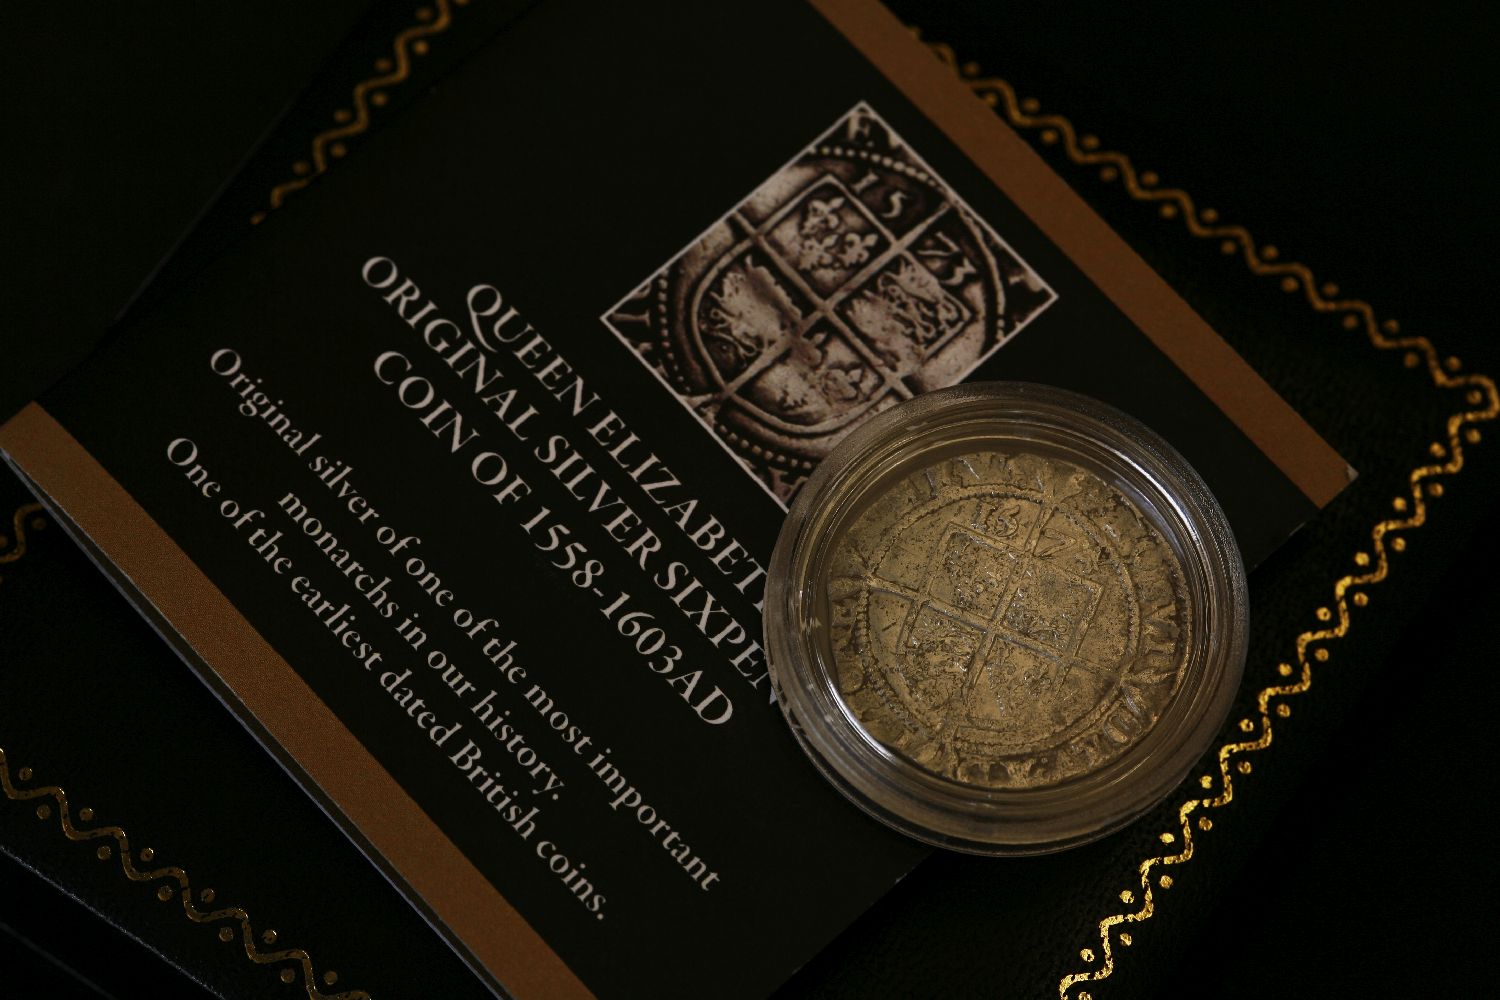 Great Britain, Elizabeth I (1558 - 1603), Sixpence, 1574 (S. 2563), released by The London Mint - Image 2 of 2